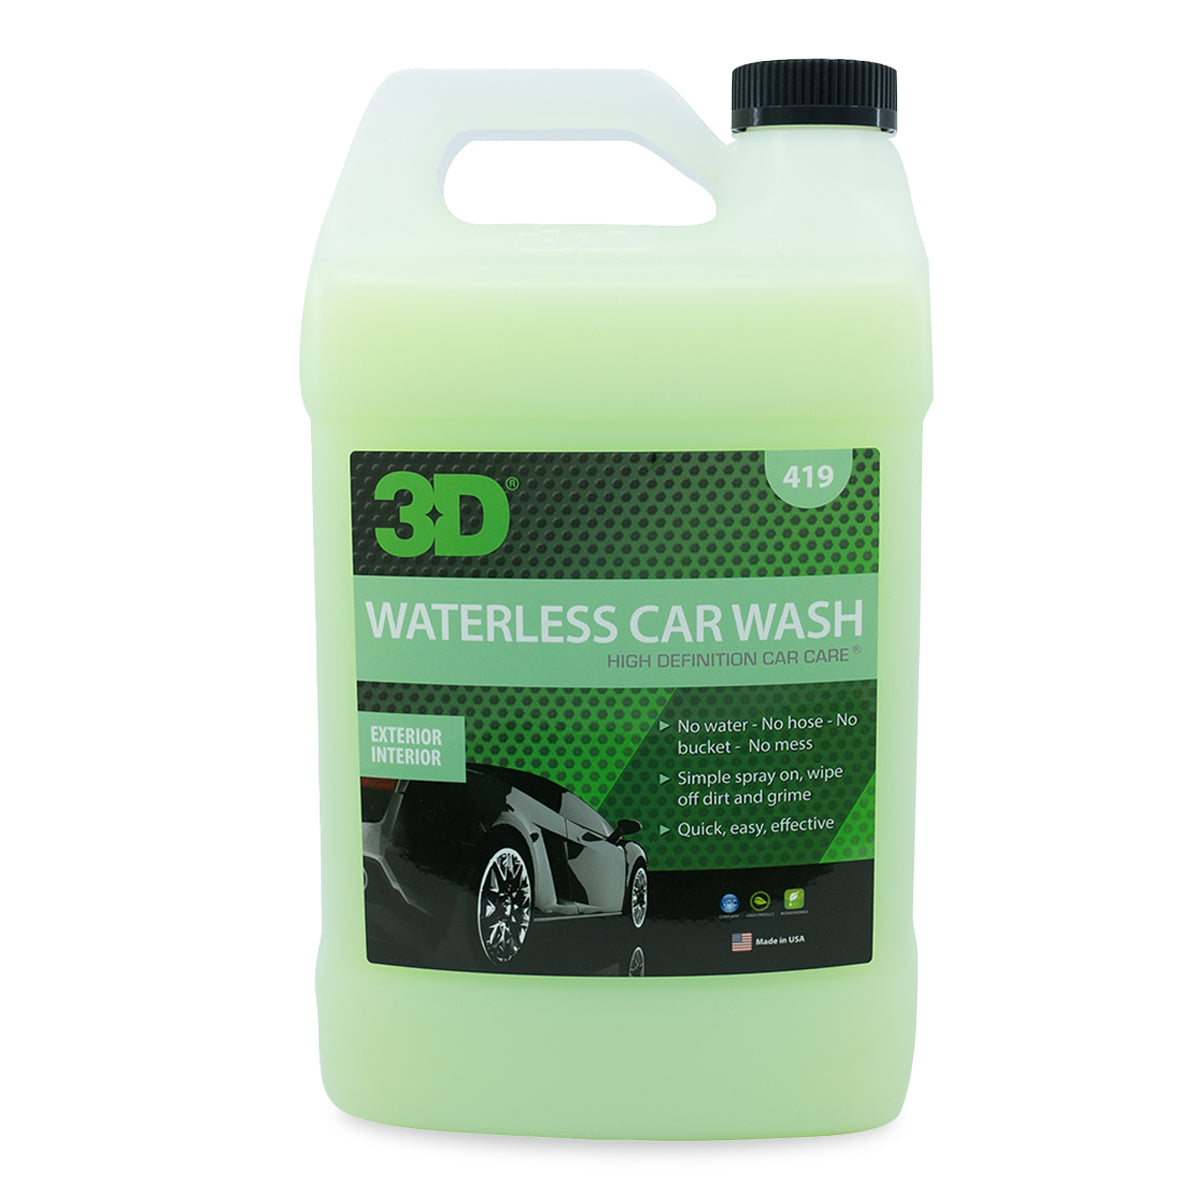 New Waterless Washes - quick review